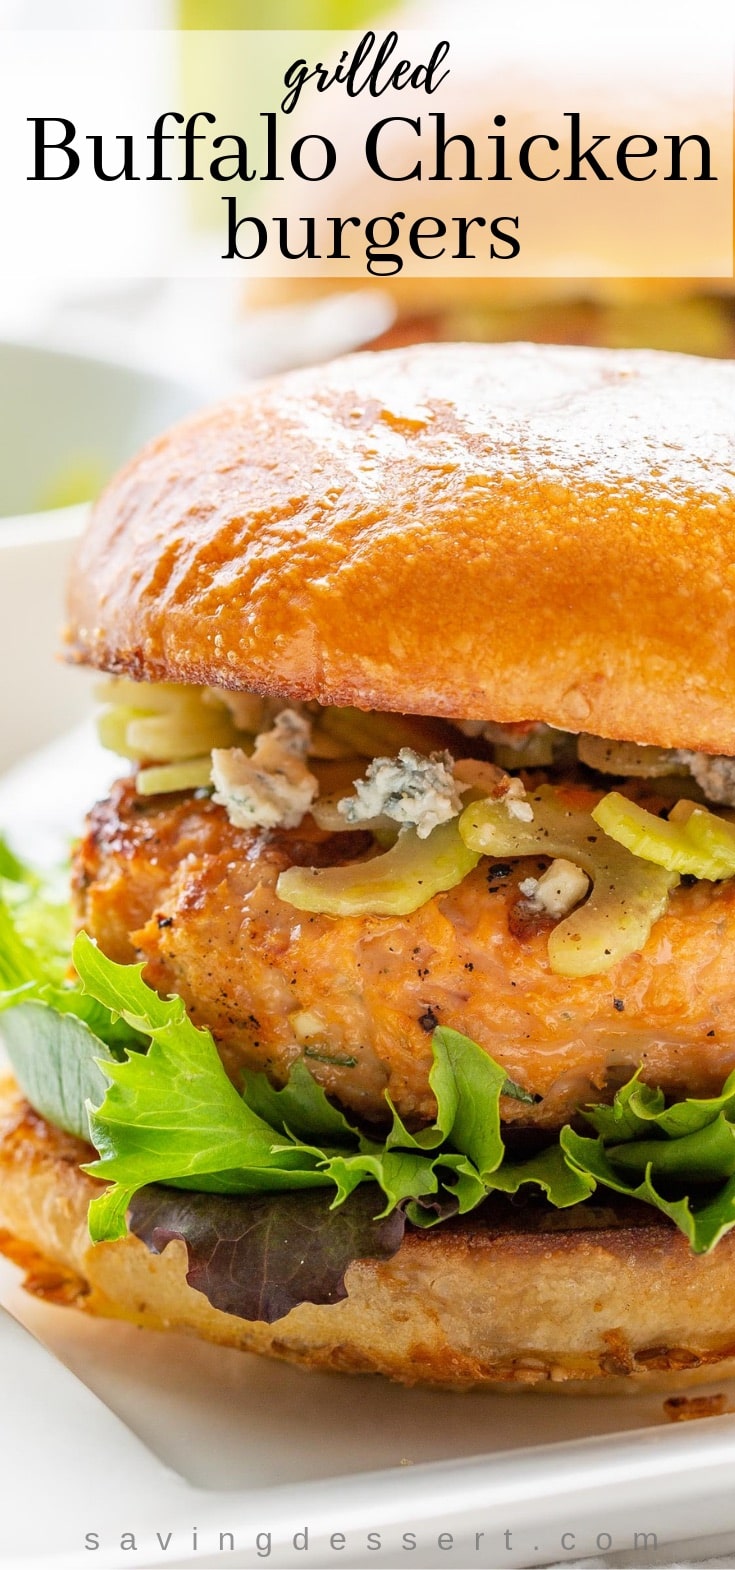 A close up of a grilled Buffalo Chicken burger with blue cheese, lettuce and a celery salad on a toasted bun